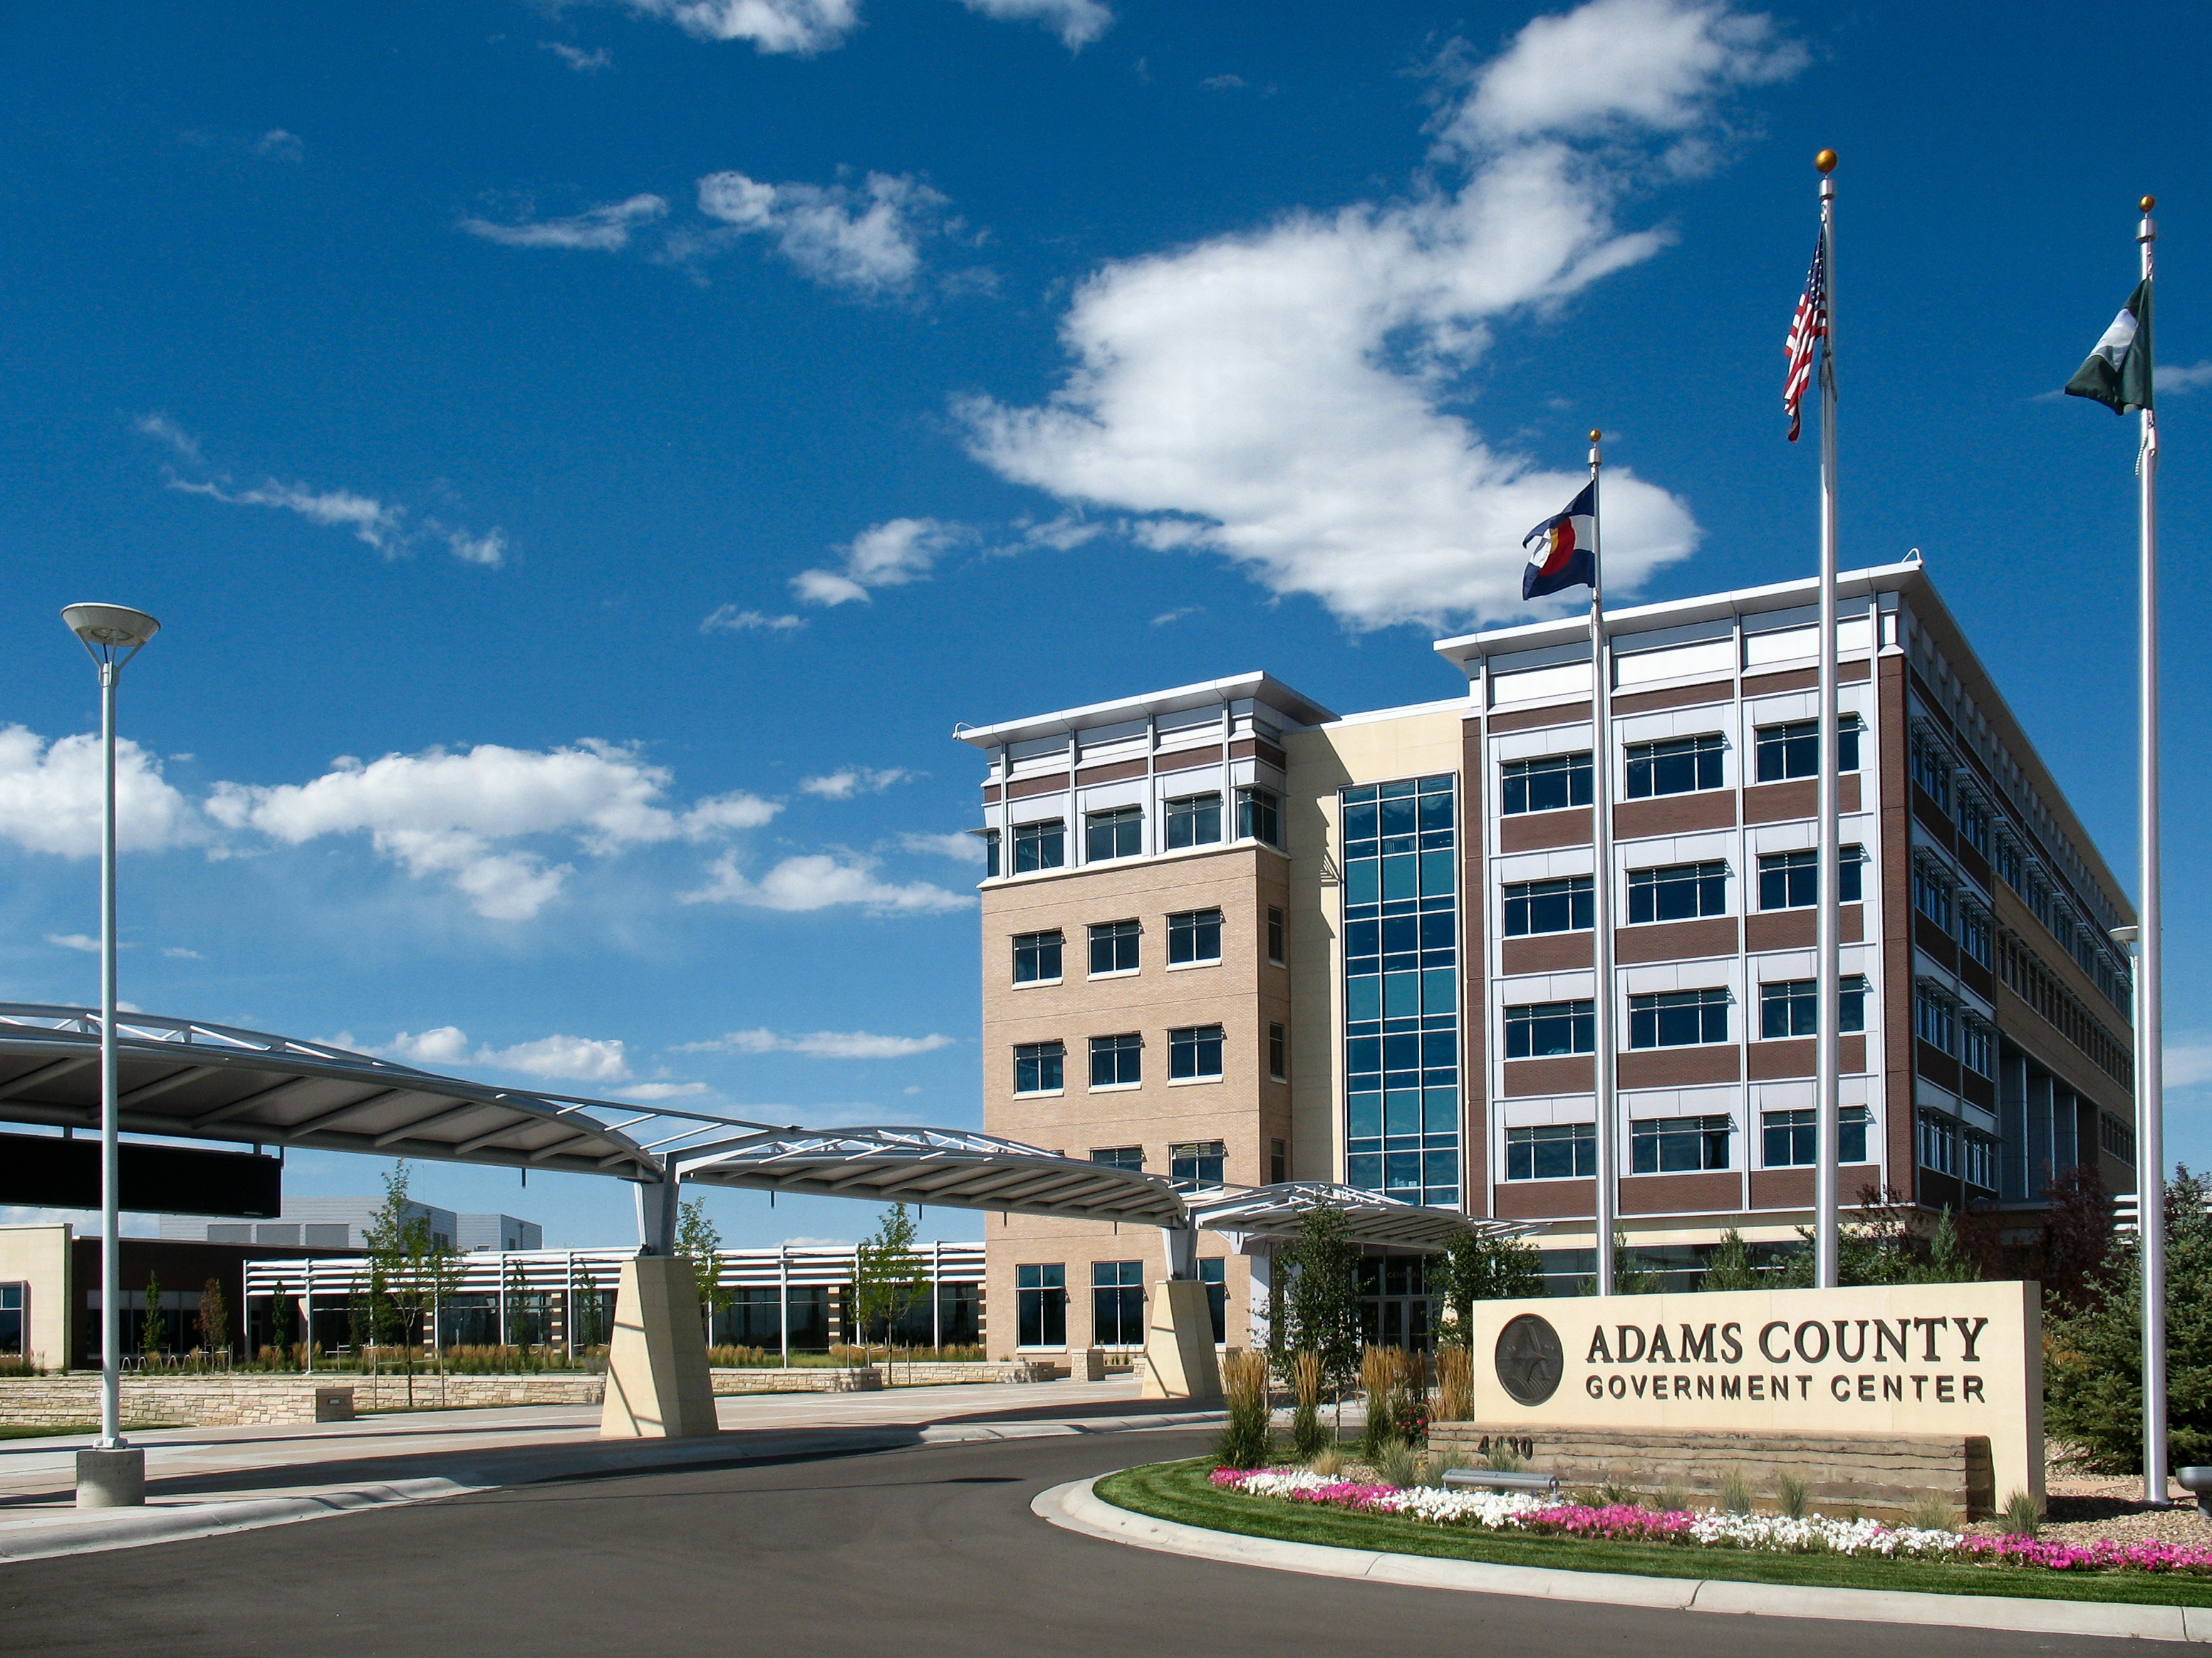 Adams County Government Center